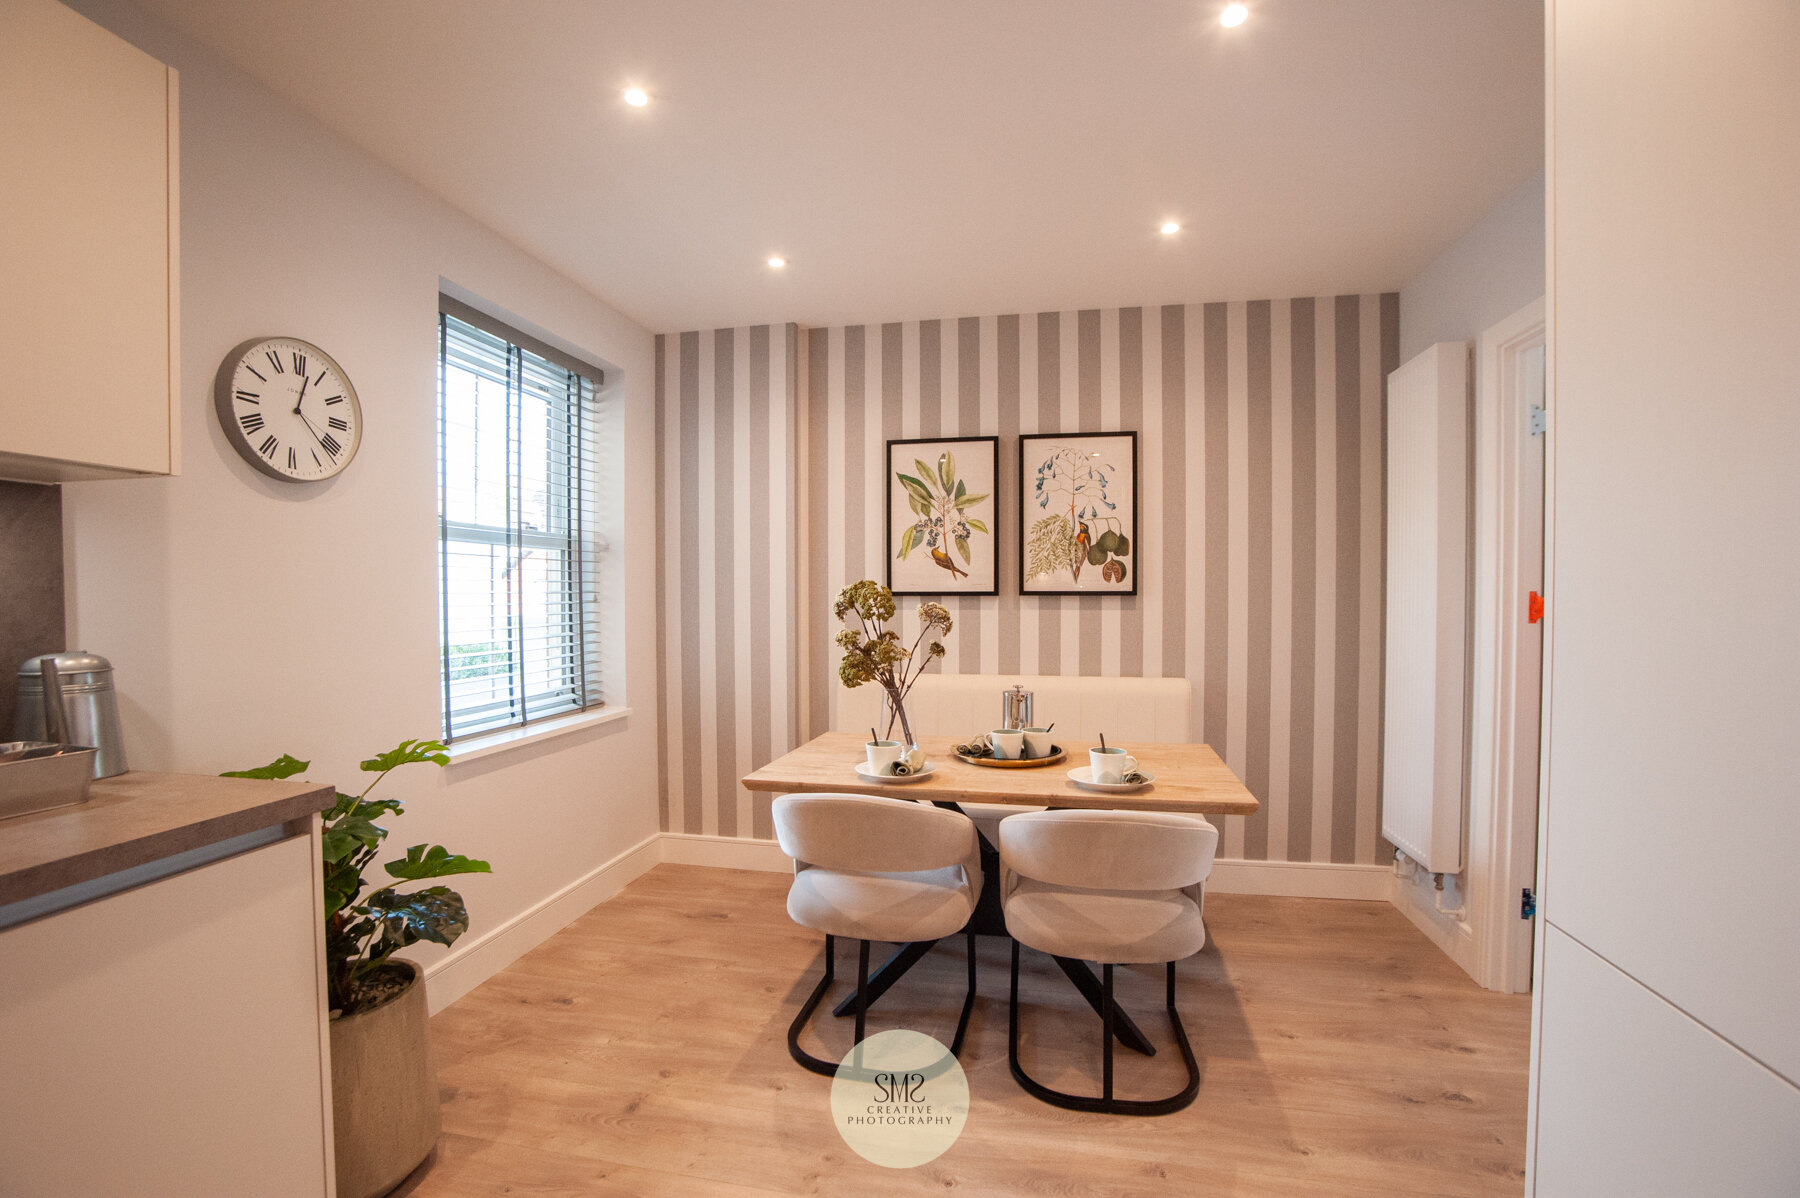  The comfortable breakfast area in the kitchen in the show home. 